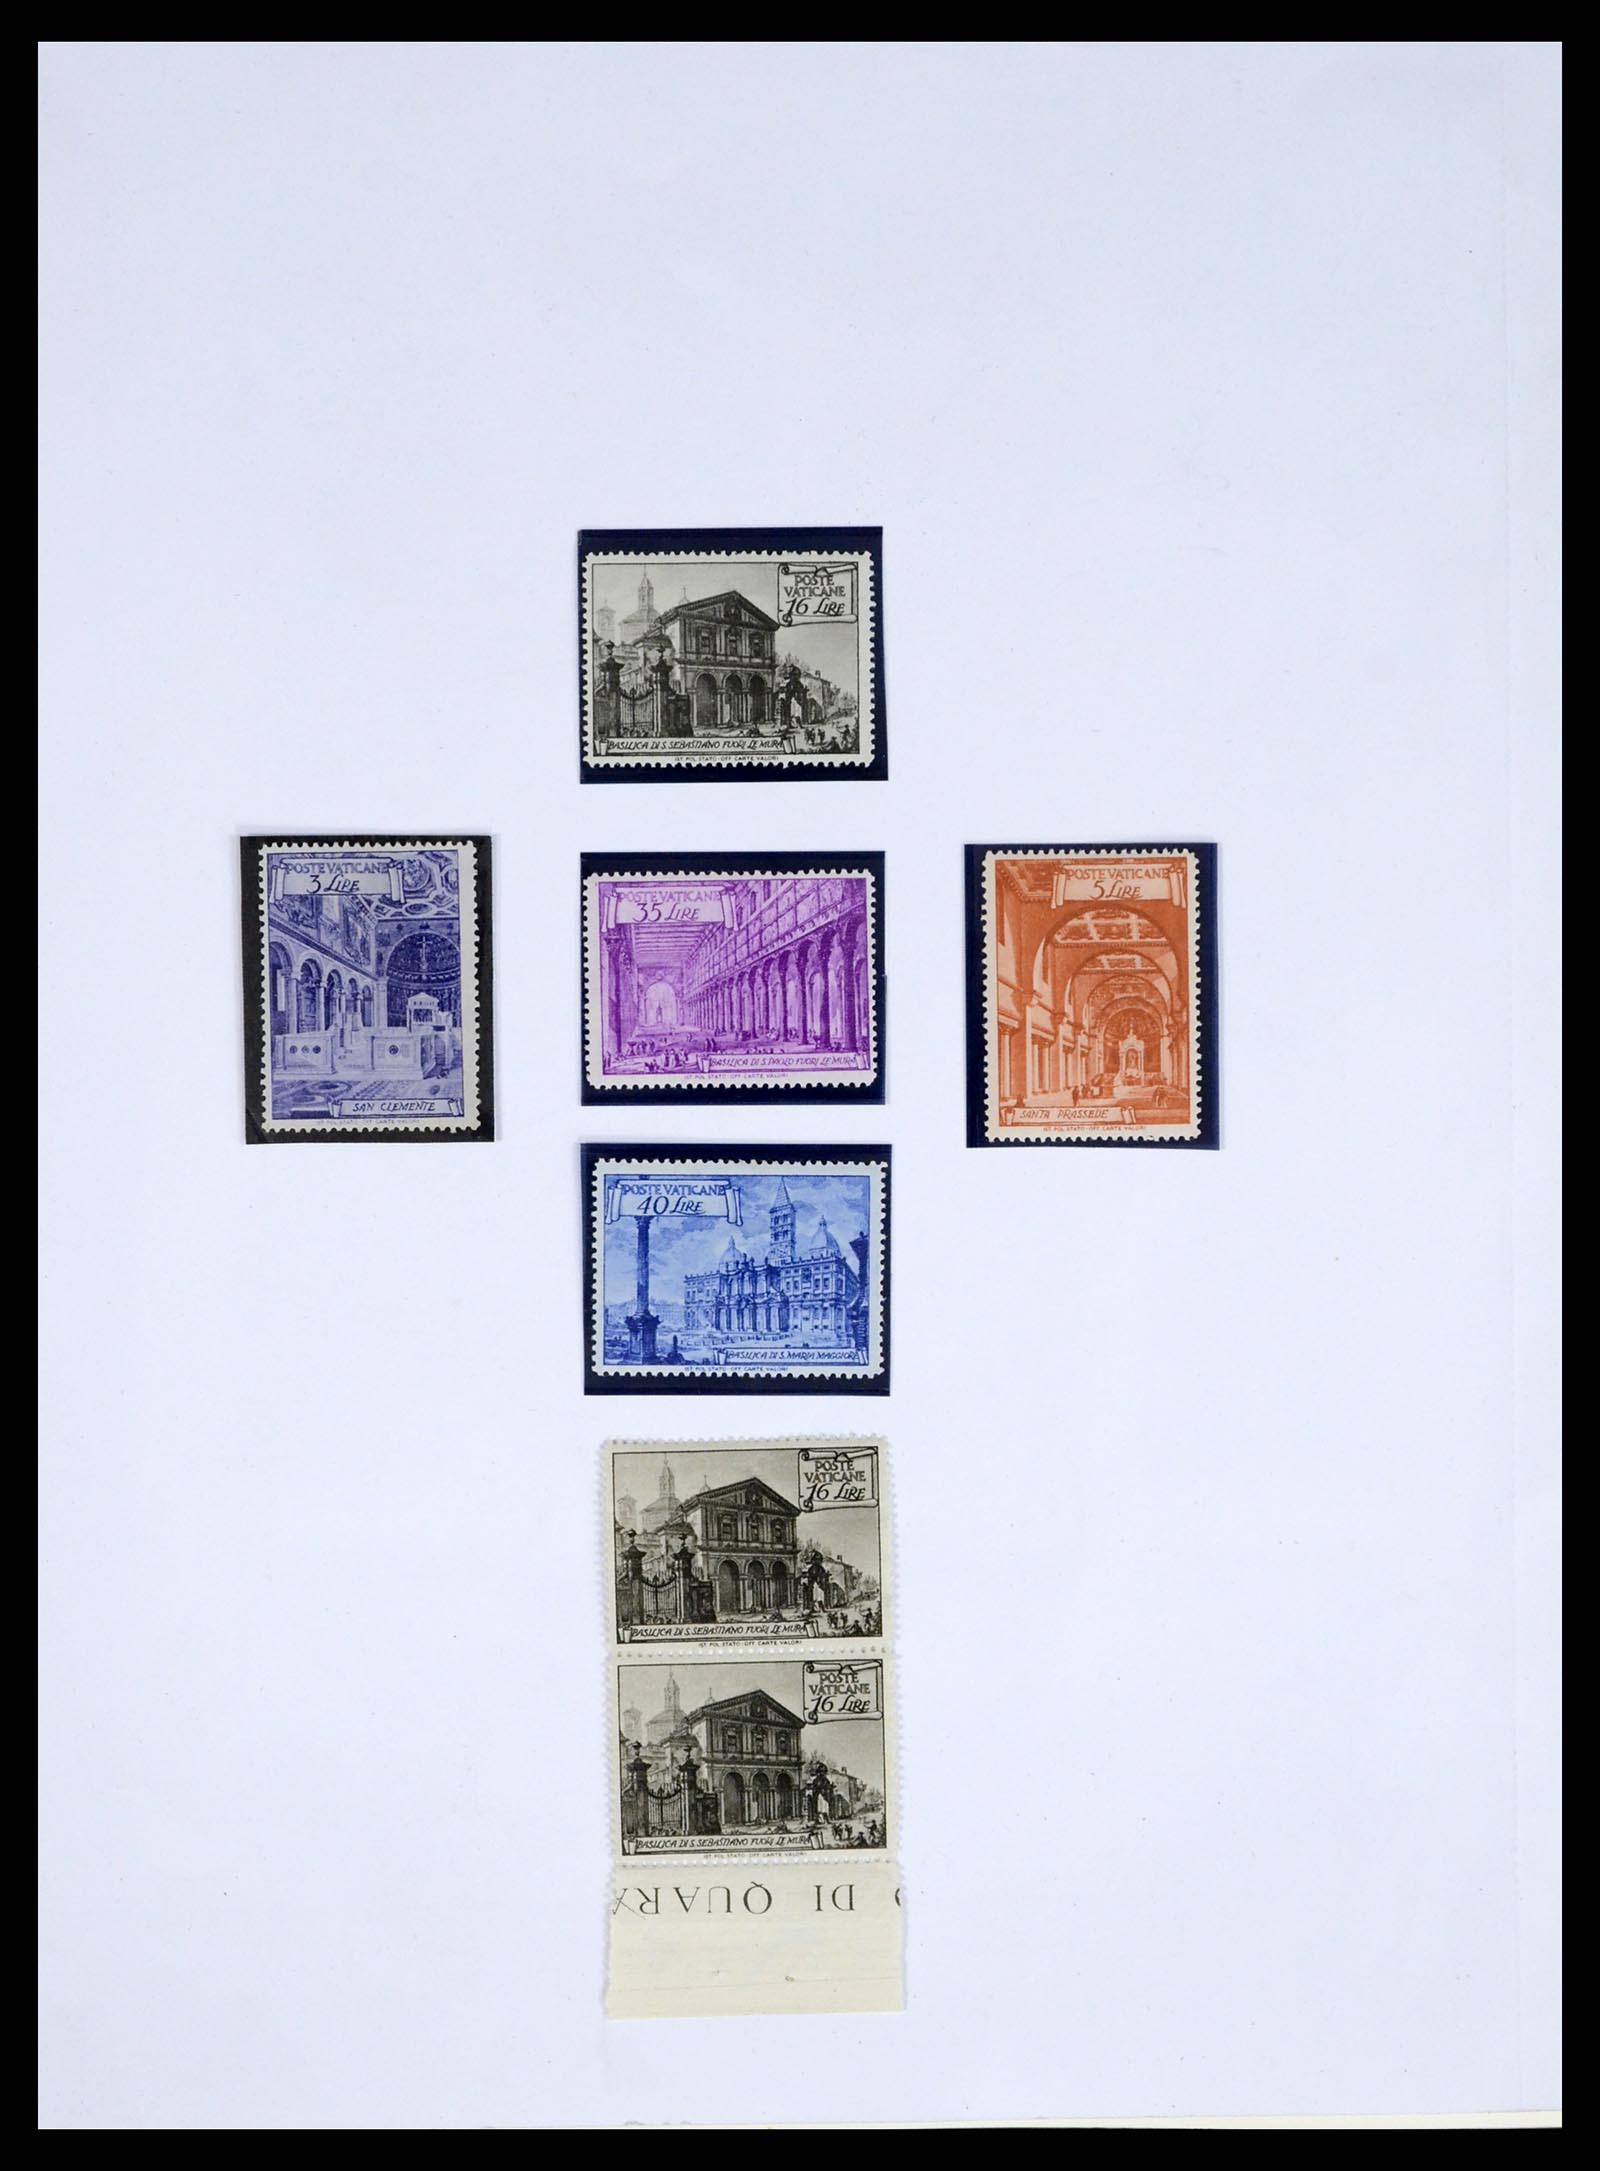 37707 0161 - Stamp collection 37707 European countries 1871-1999.